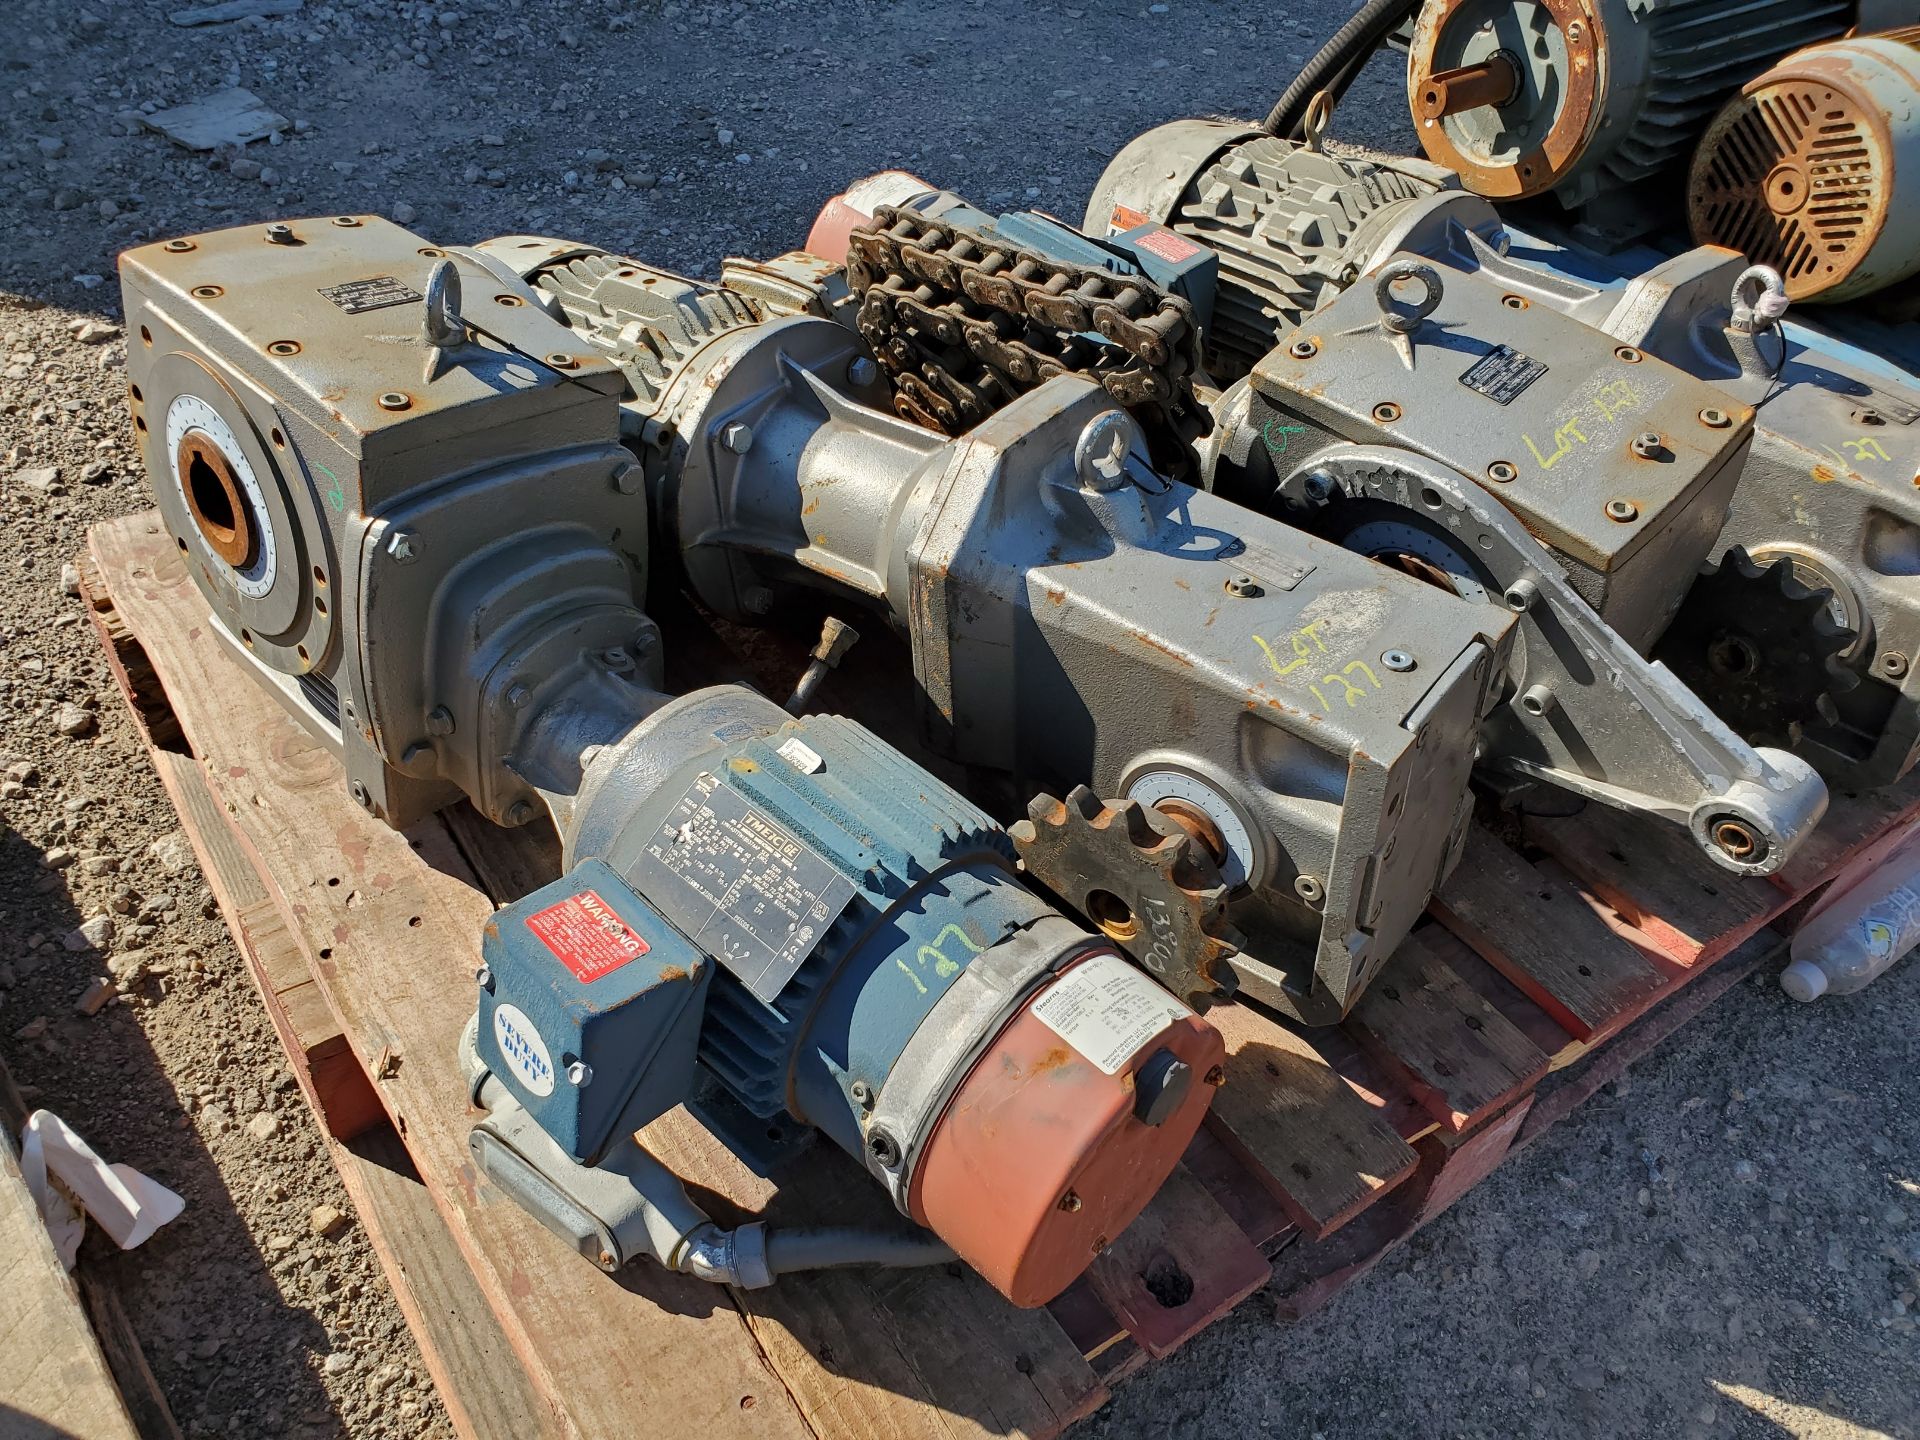 (4) NORD DRIVESYSTEMS 25.39:1 GEAR REDUCERS WITH GE 1 HP ELECTRIC MOTORS - Image 2 of 9